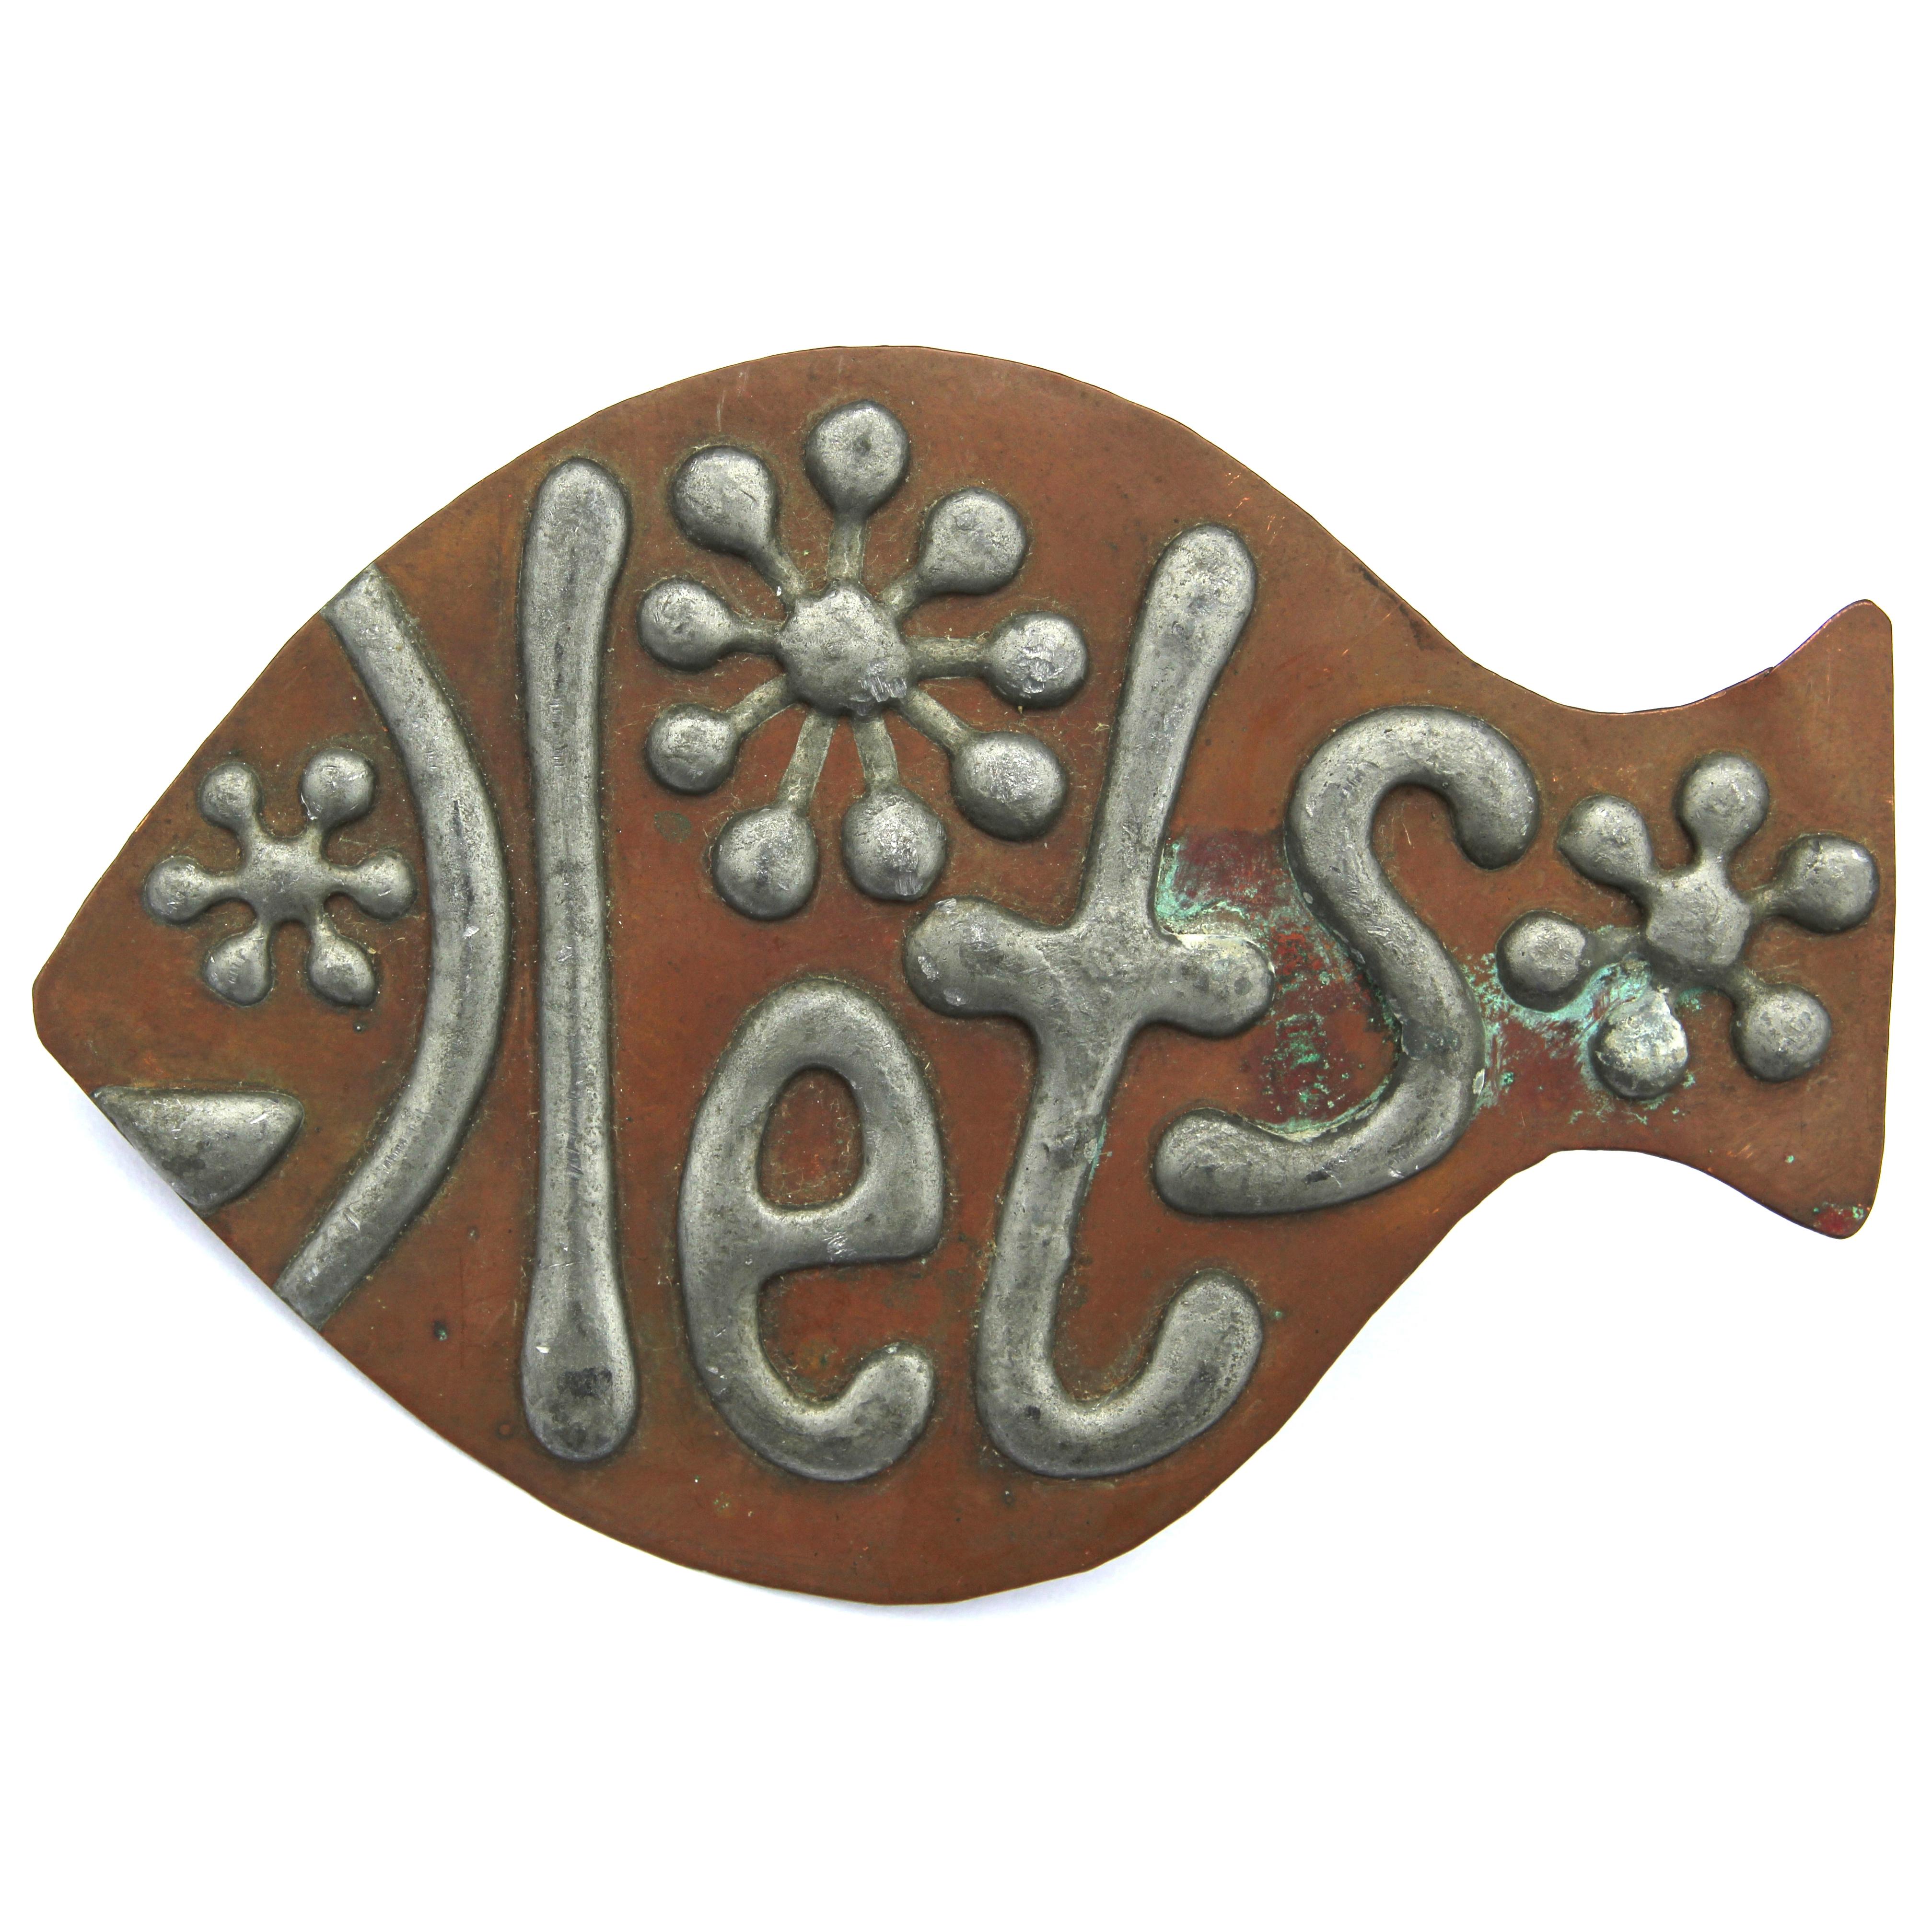 "Let's" Modern Abstract Copper Metal Fish Word Art Wall Sculpture